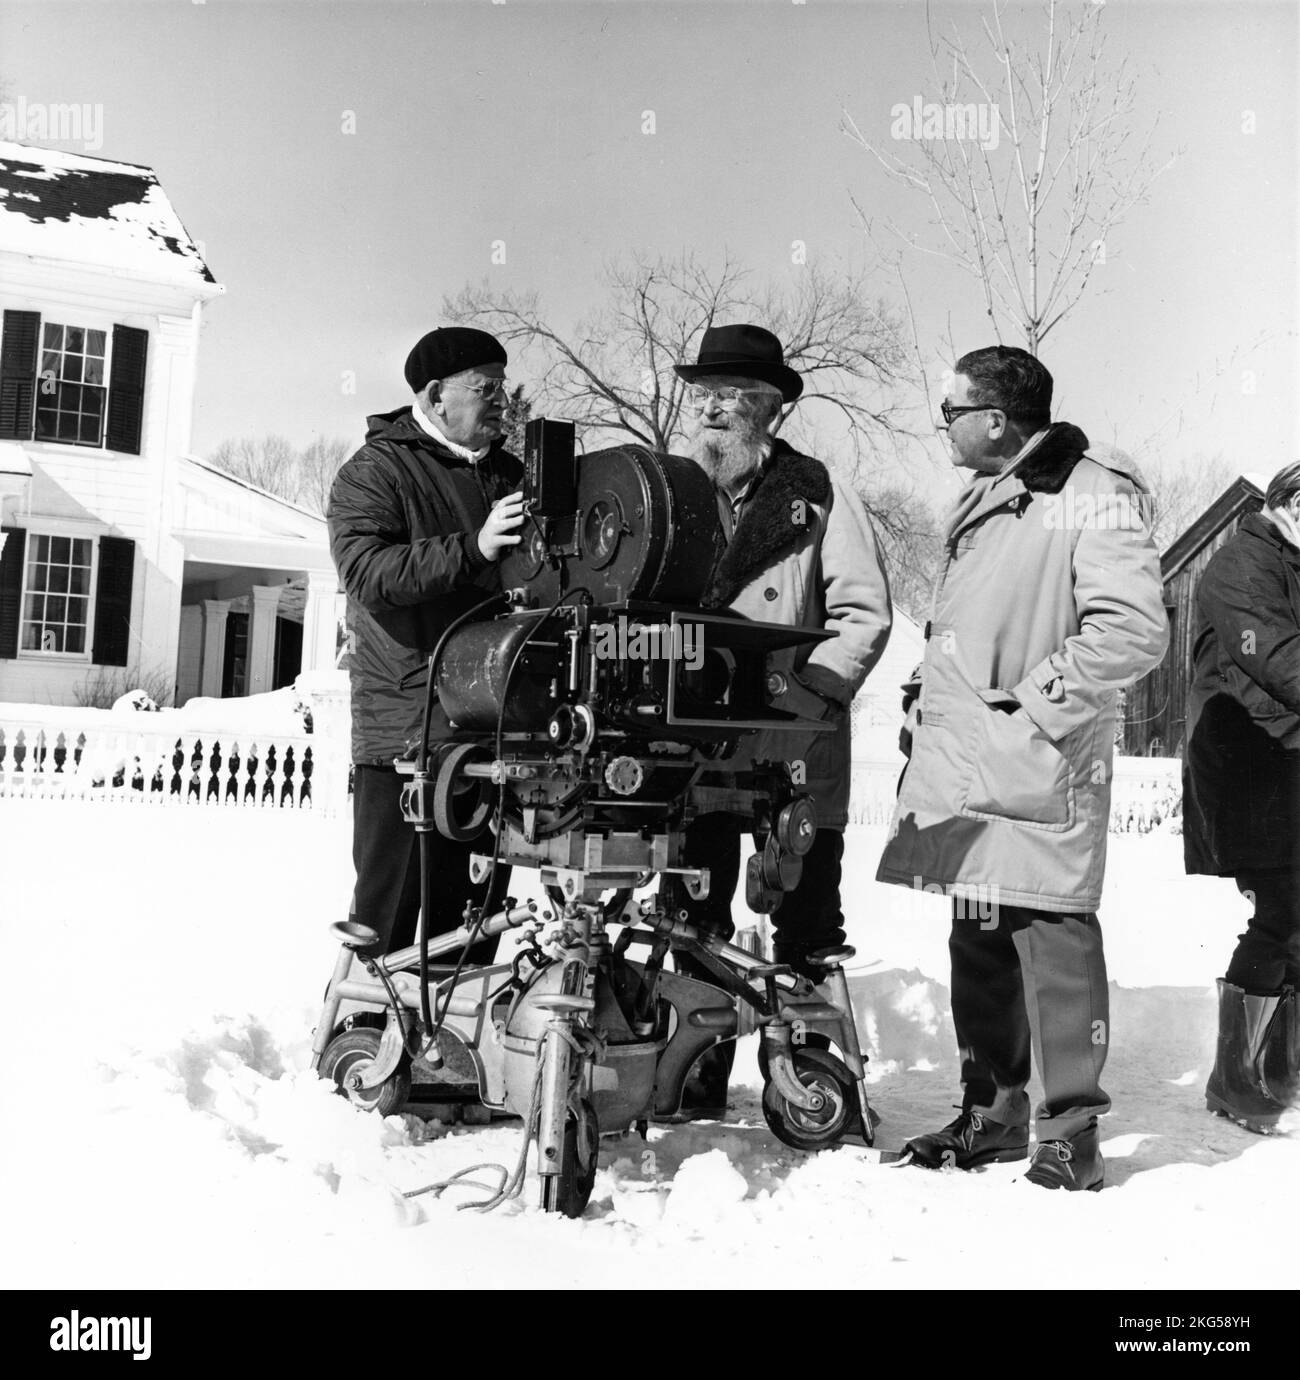 Cinematographer WILLIAM H. DANIELS Set Visitor legendary still photographer EDWARD STEICHEN and Director MARK ROBSON on set location candid at Redding, Connecticut during filming of VALLEY OF THE DOLLS 1967 director MARK ROBSON novel Jacqueline Susann Red Lion / Twentieth Century Fox Stock Photo